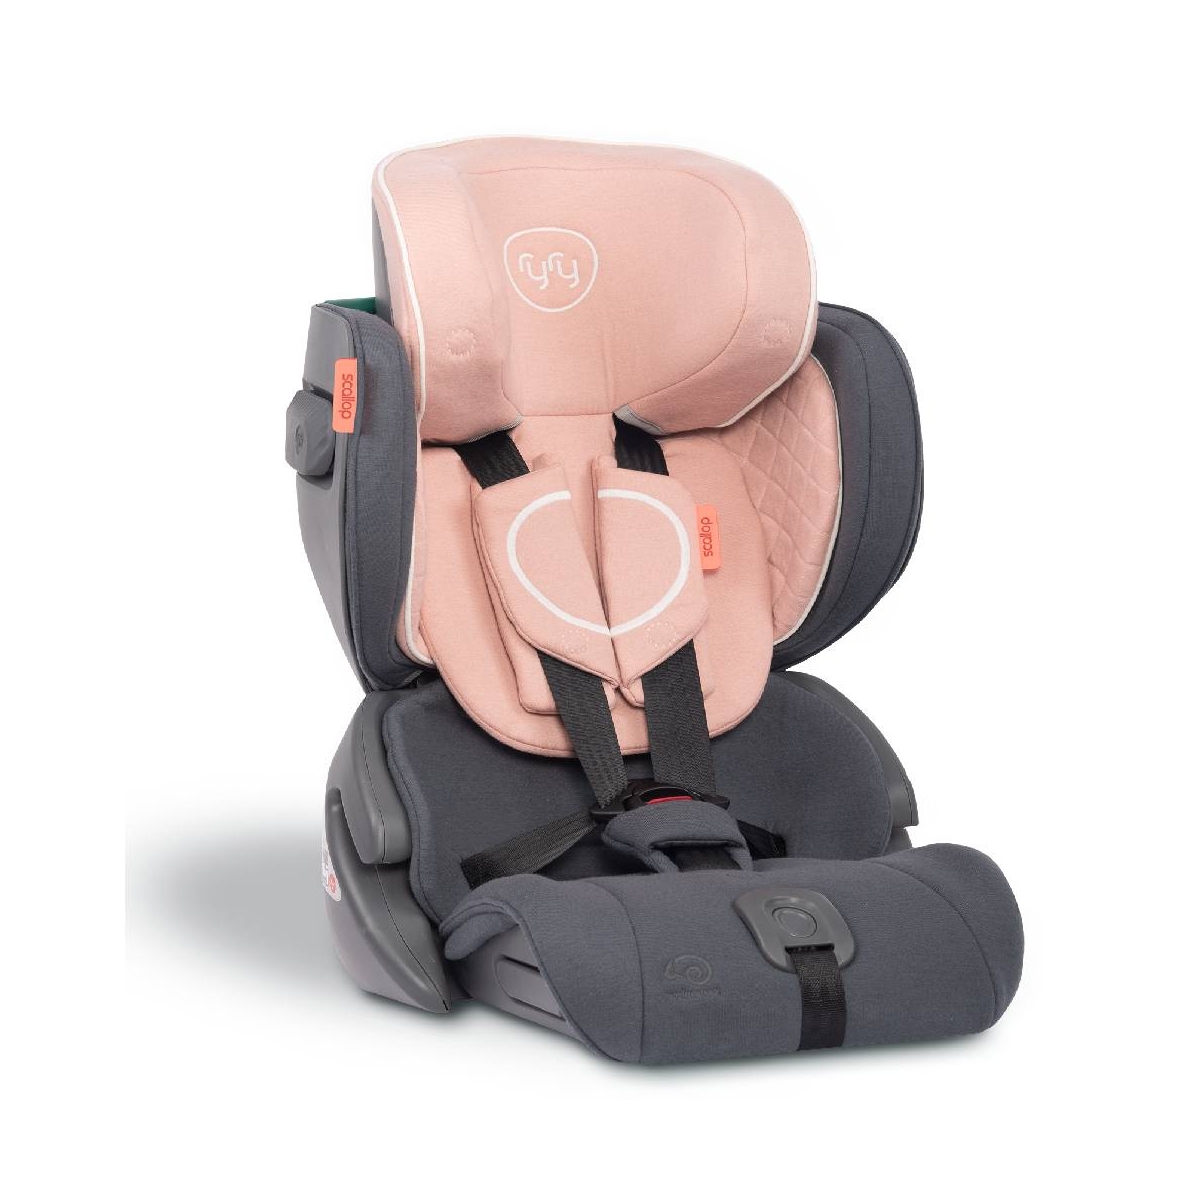 RyRy Scallop Compact Car Seat